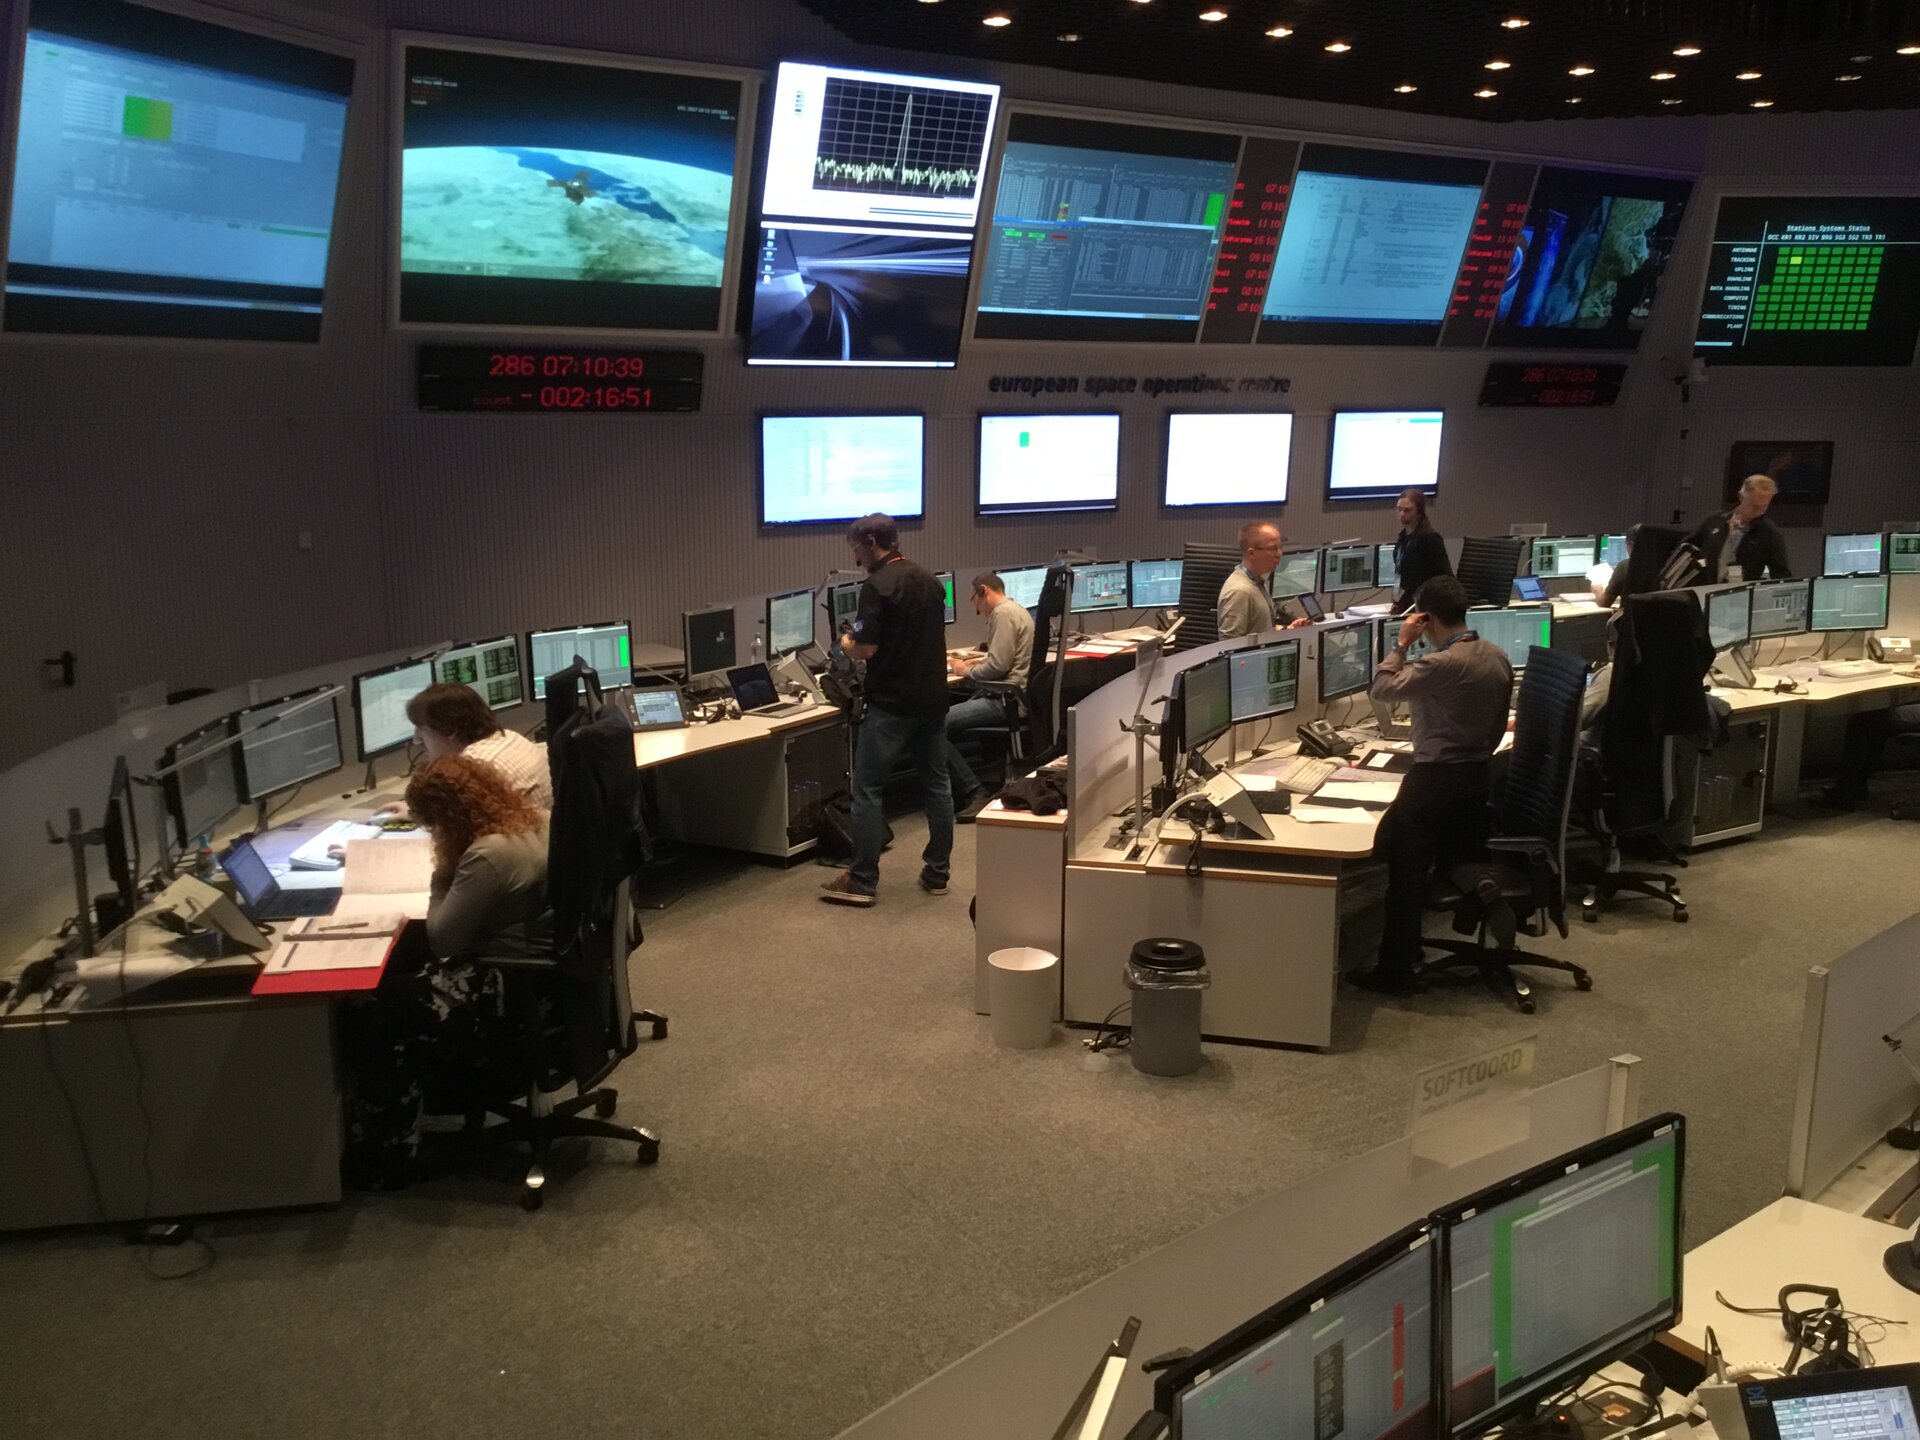 Launch day at Mission control